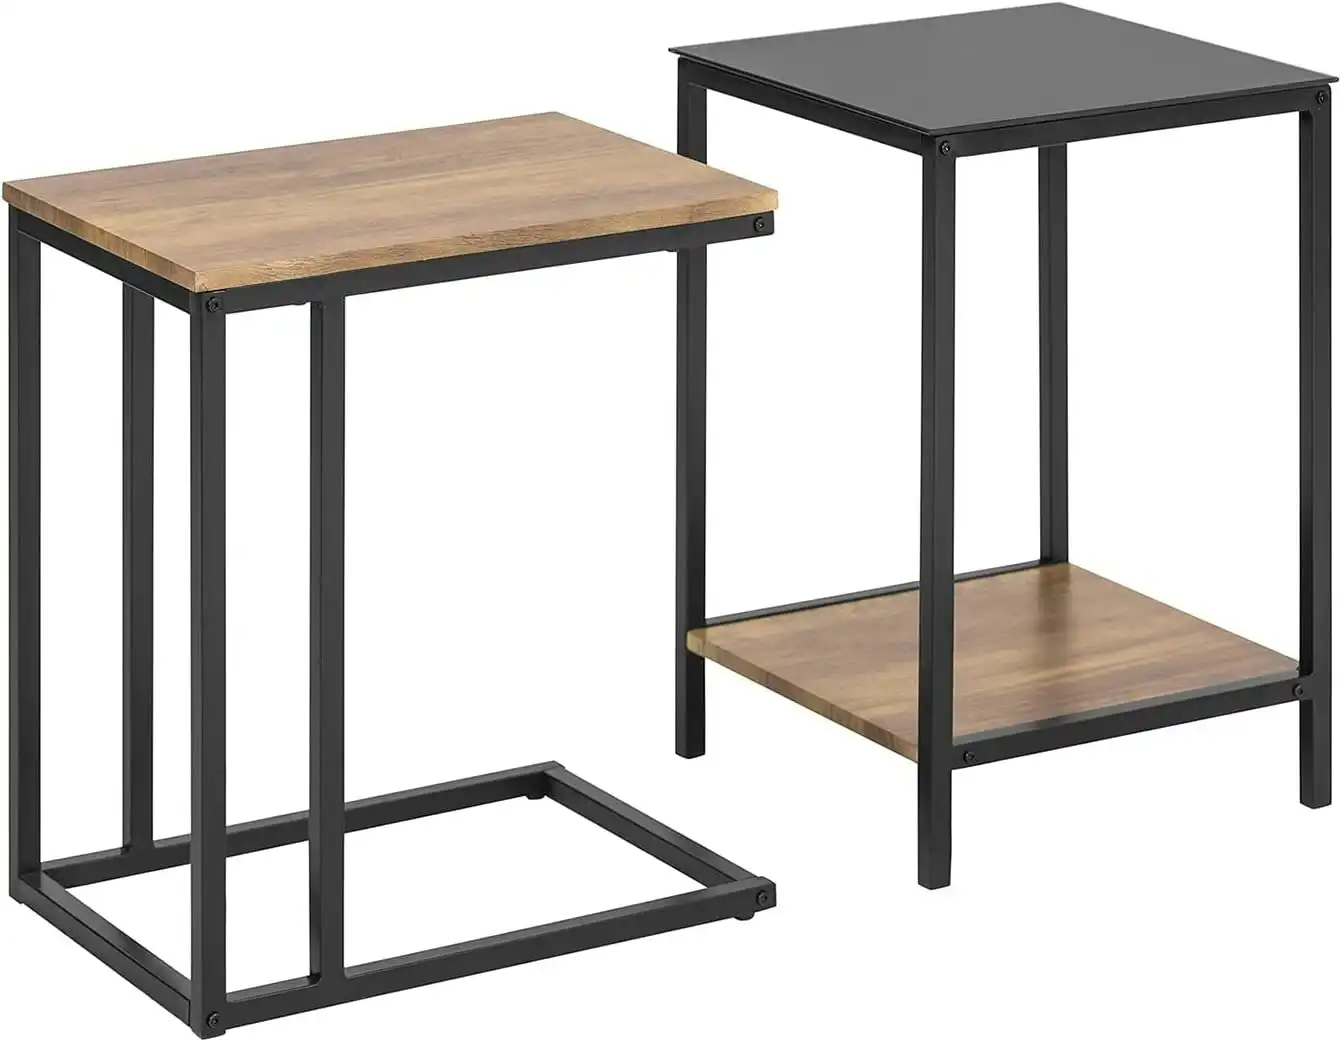 Set of 2 Side Tables - Stackable Coffee Tables for Living Room